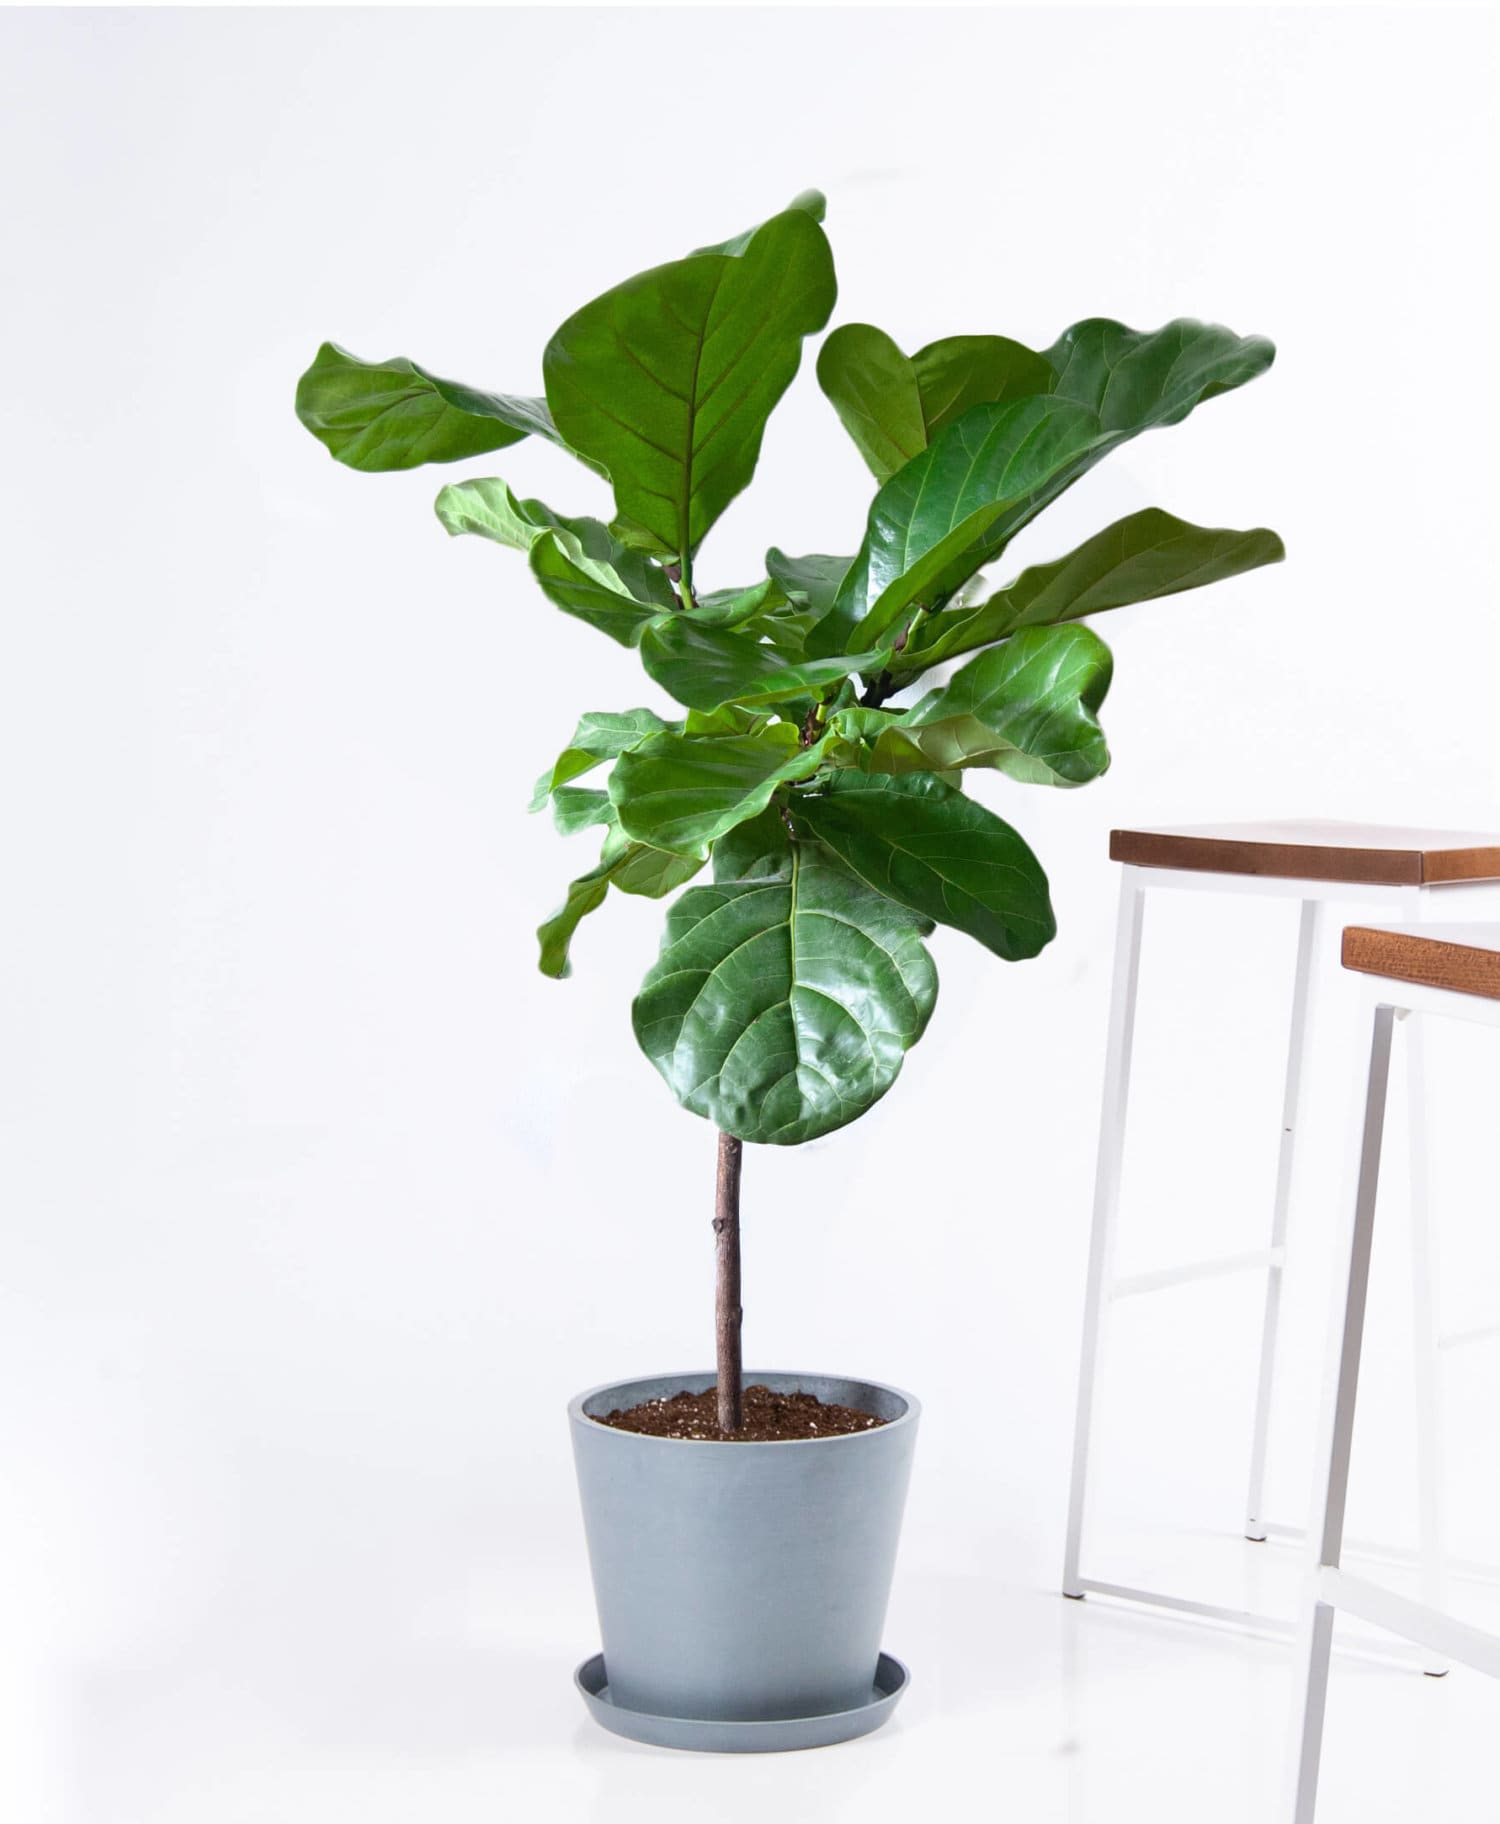 Big Leaf Houseplants to Plant Indoors   Apartment Therapy